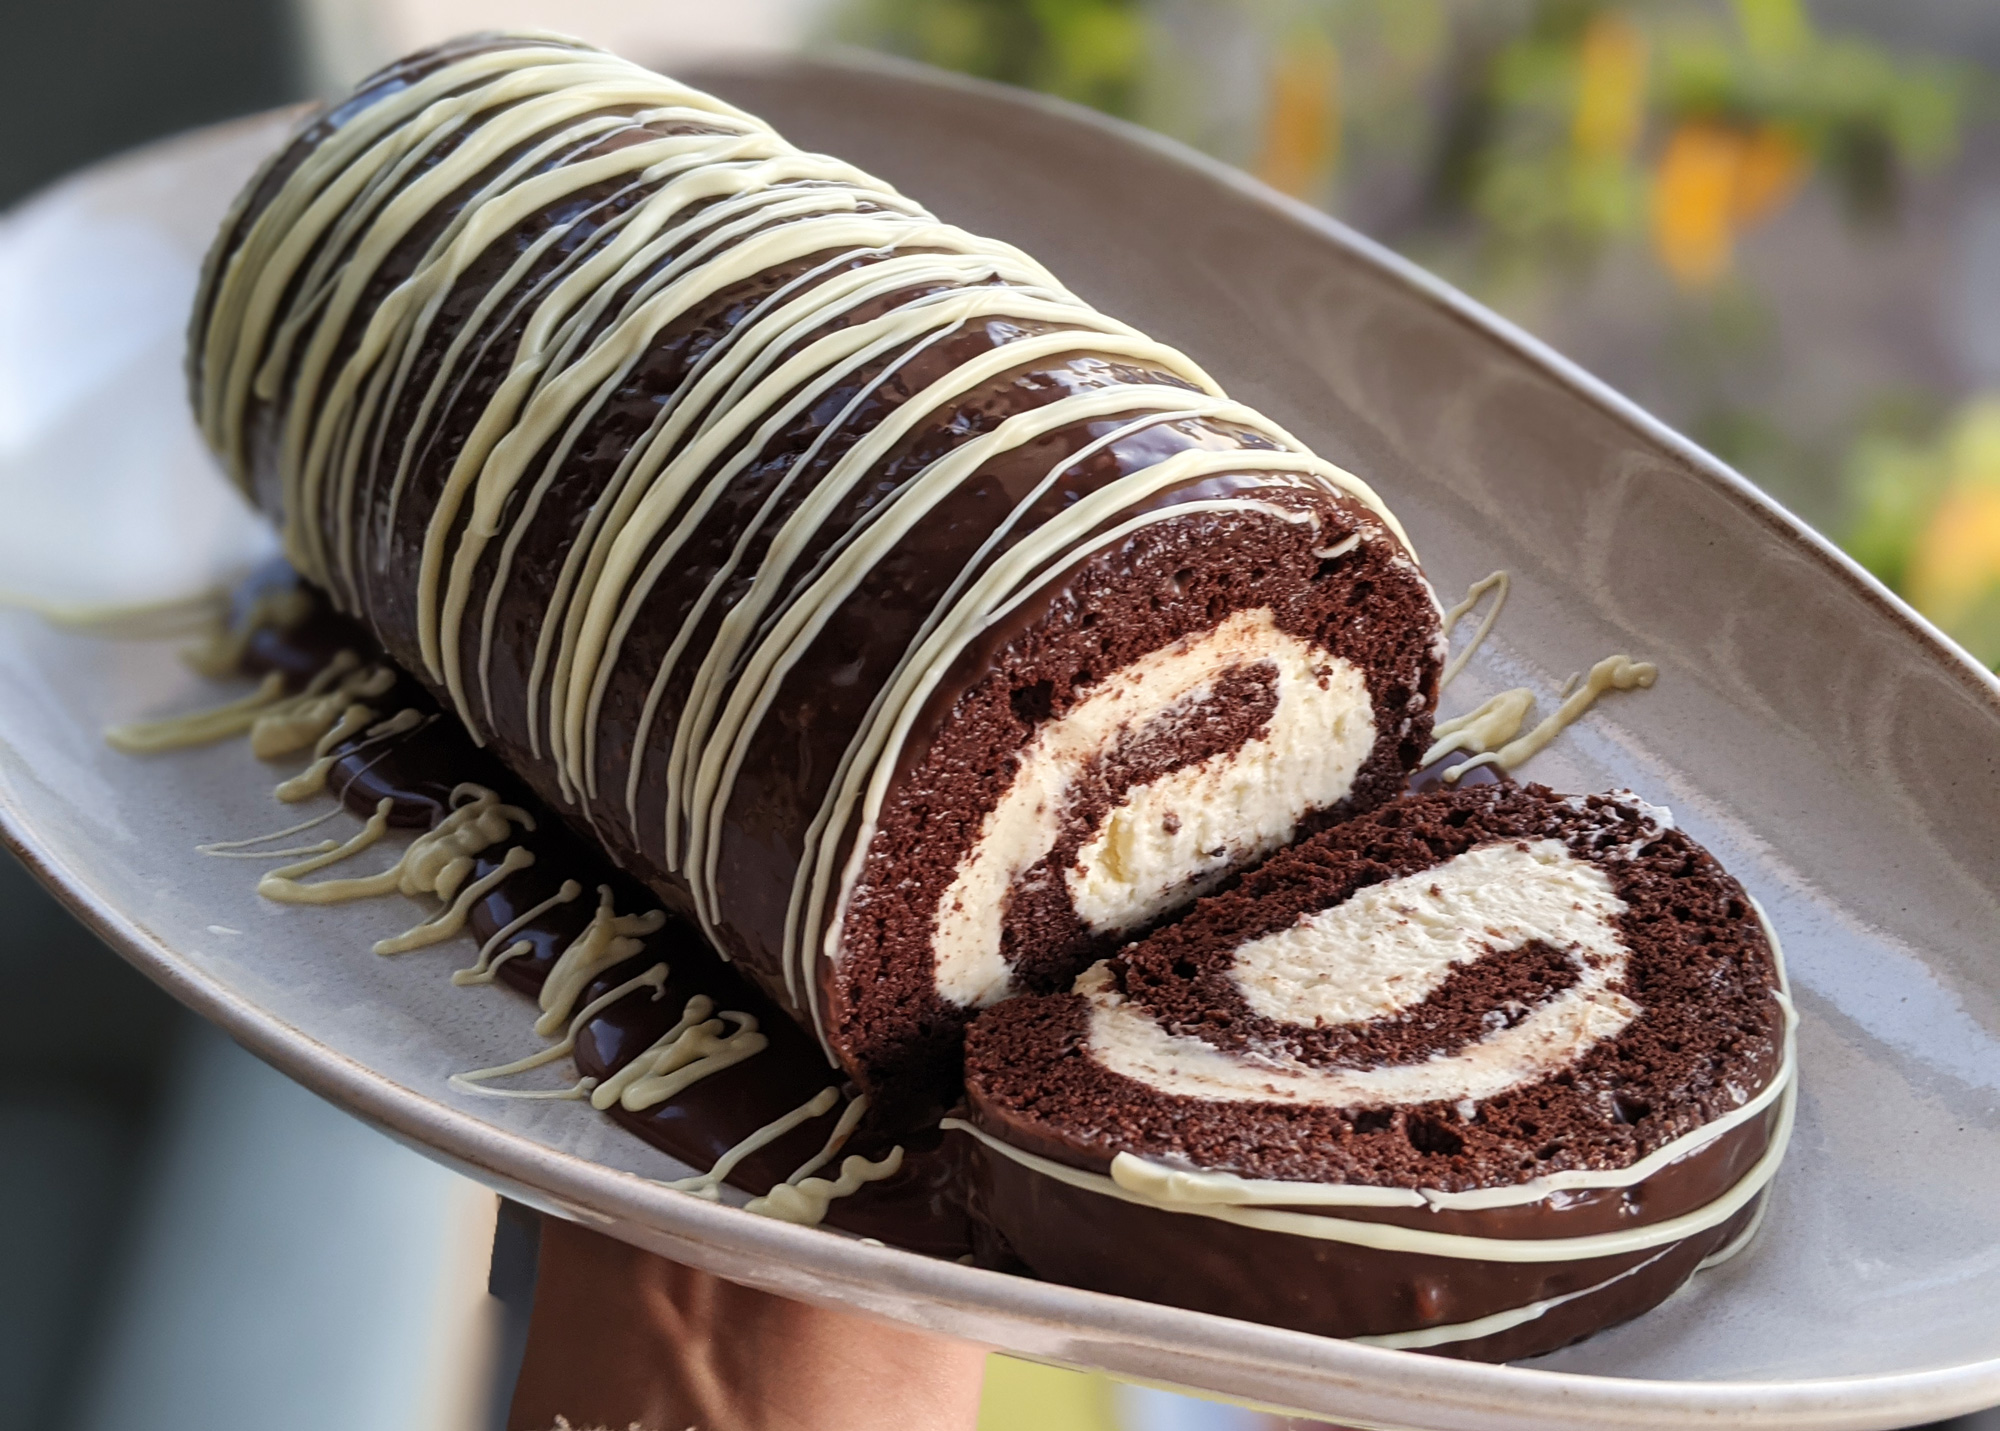 Winkies Chocolate Swiss Roll Price - Buy Online at ₹81 in India